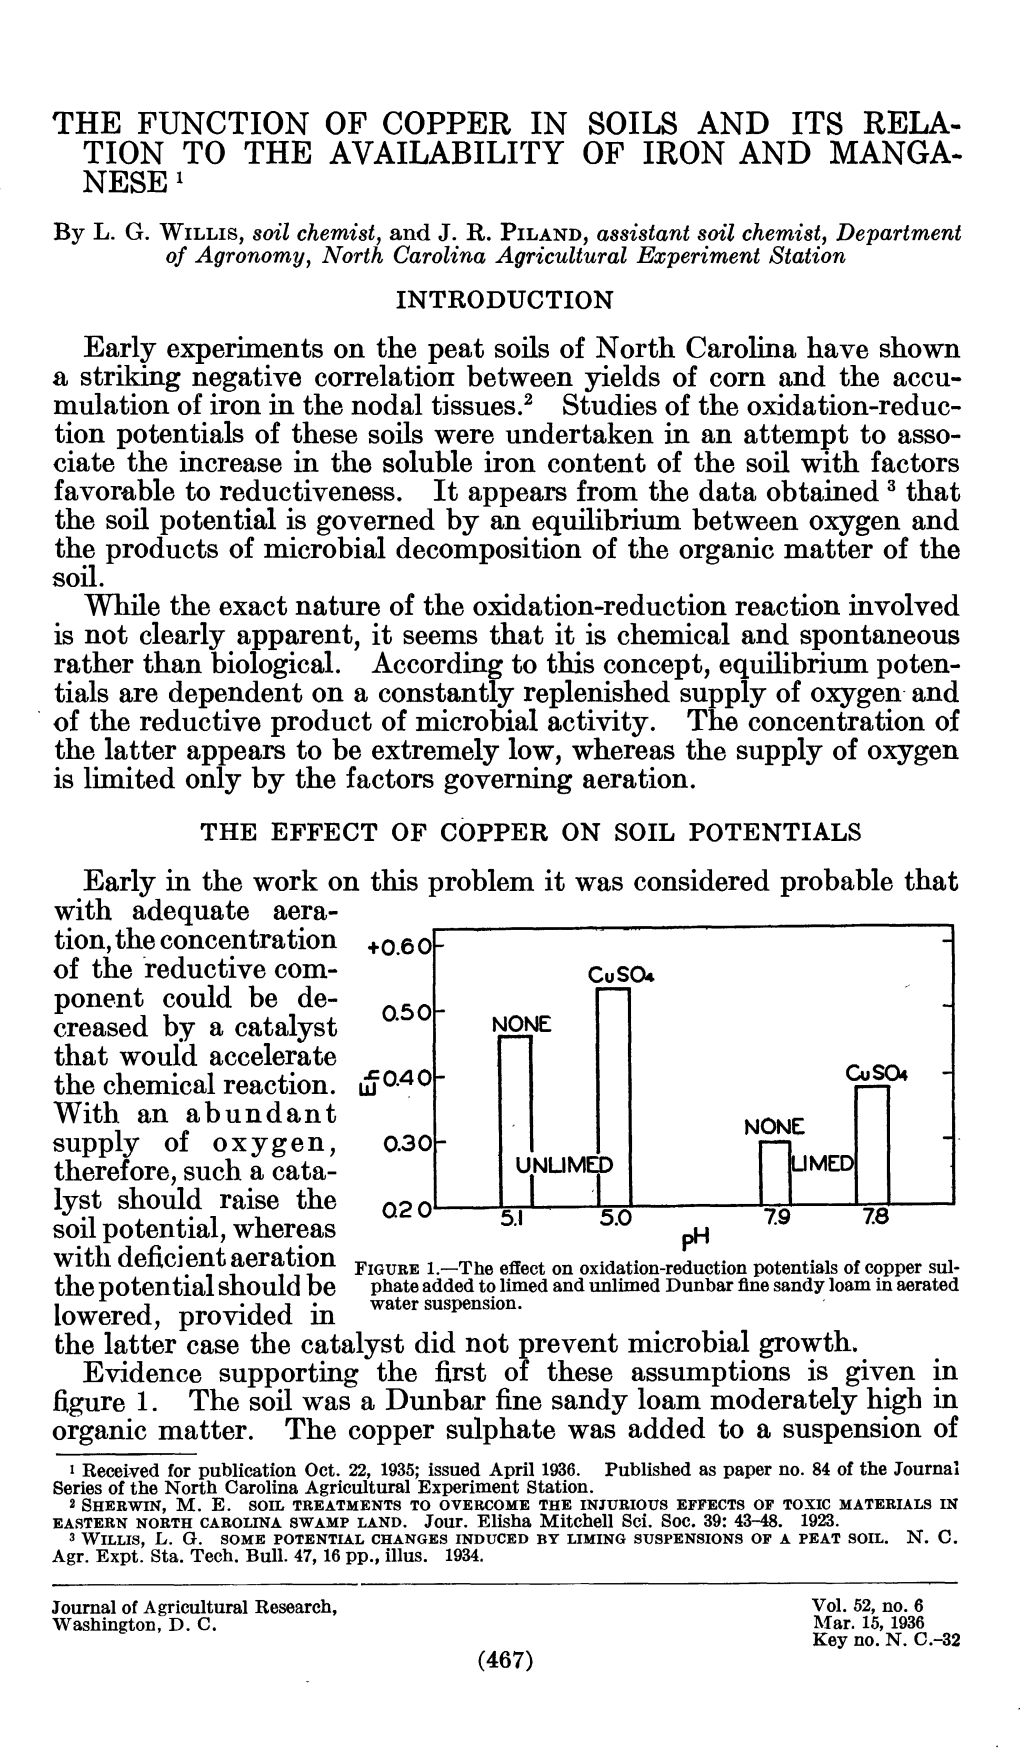 The Function of Copper in Soils and Its Rela- Tion to the Availability of Iron and Manga- Nese '